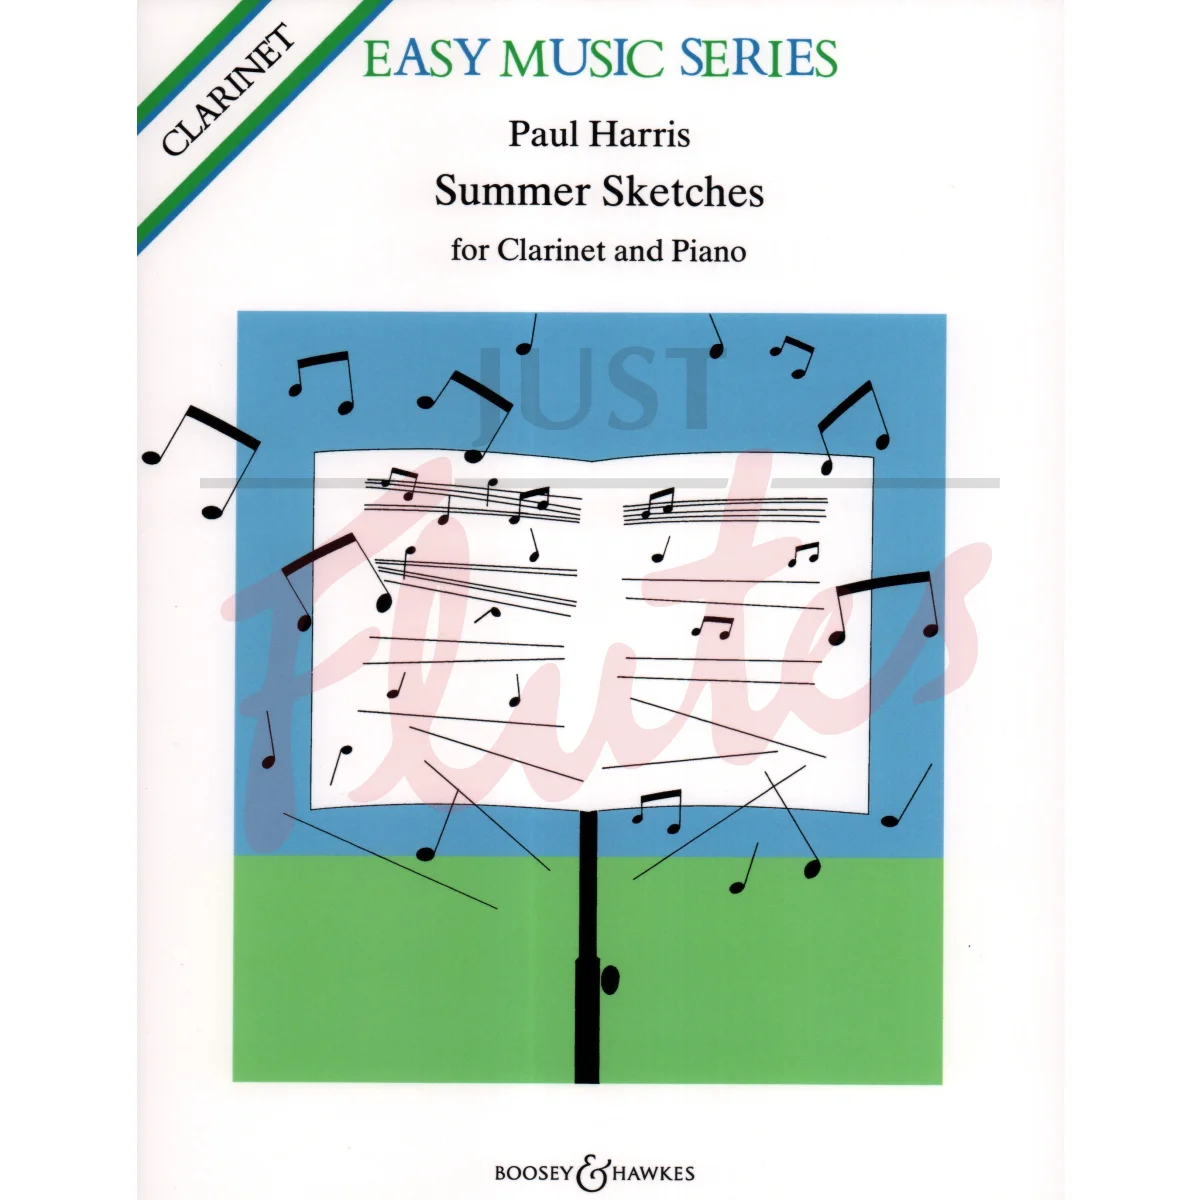 Summer Sketches for Clarinet and Piano